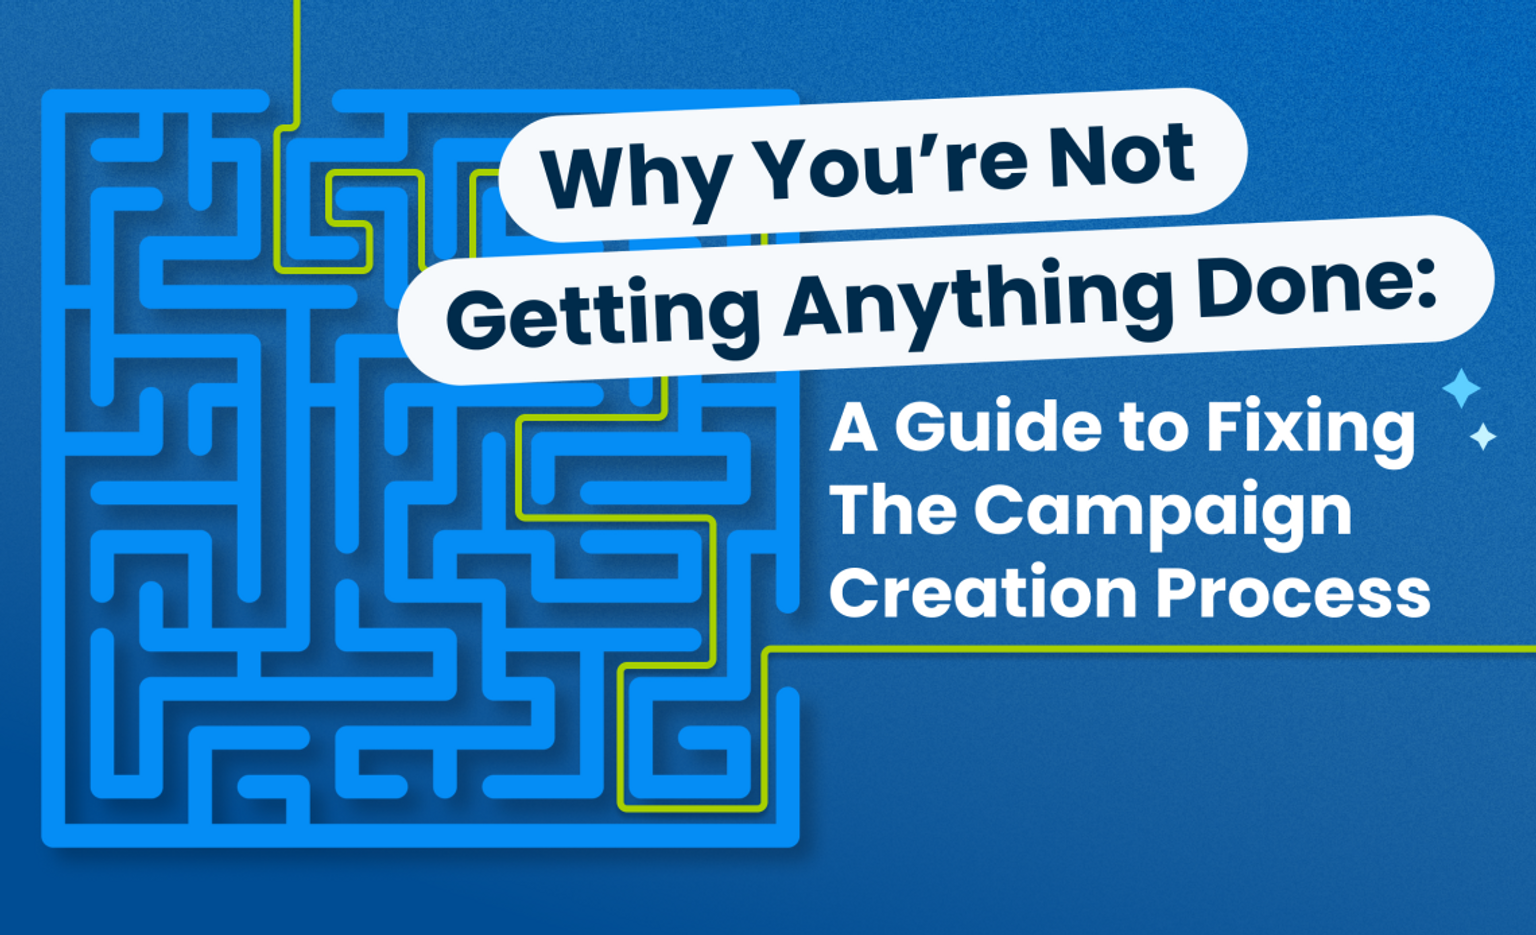 Why You’re Not Getting Anything Done: A Guide to Fixing The Campaign Creation Process